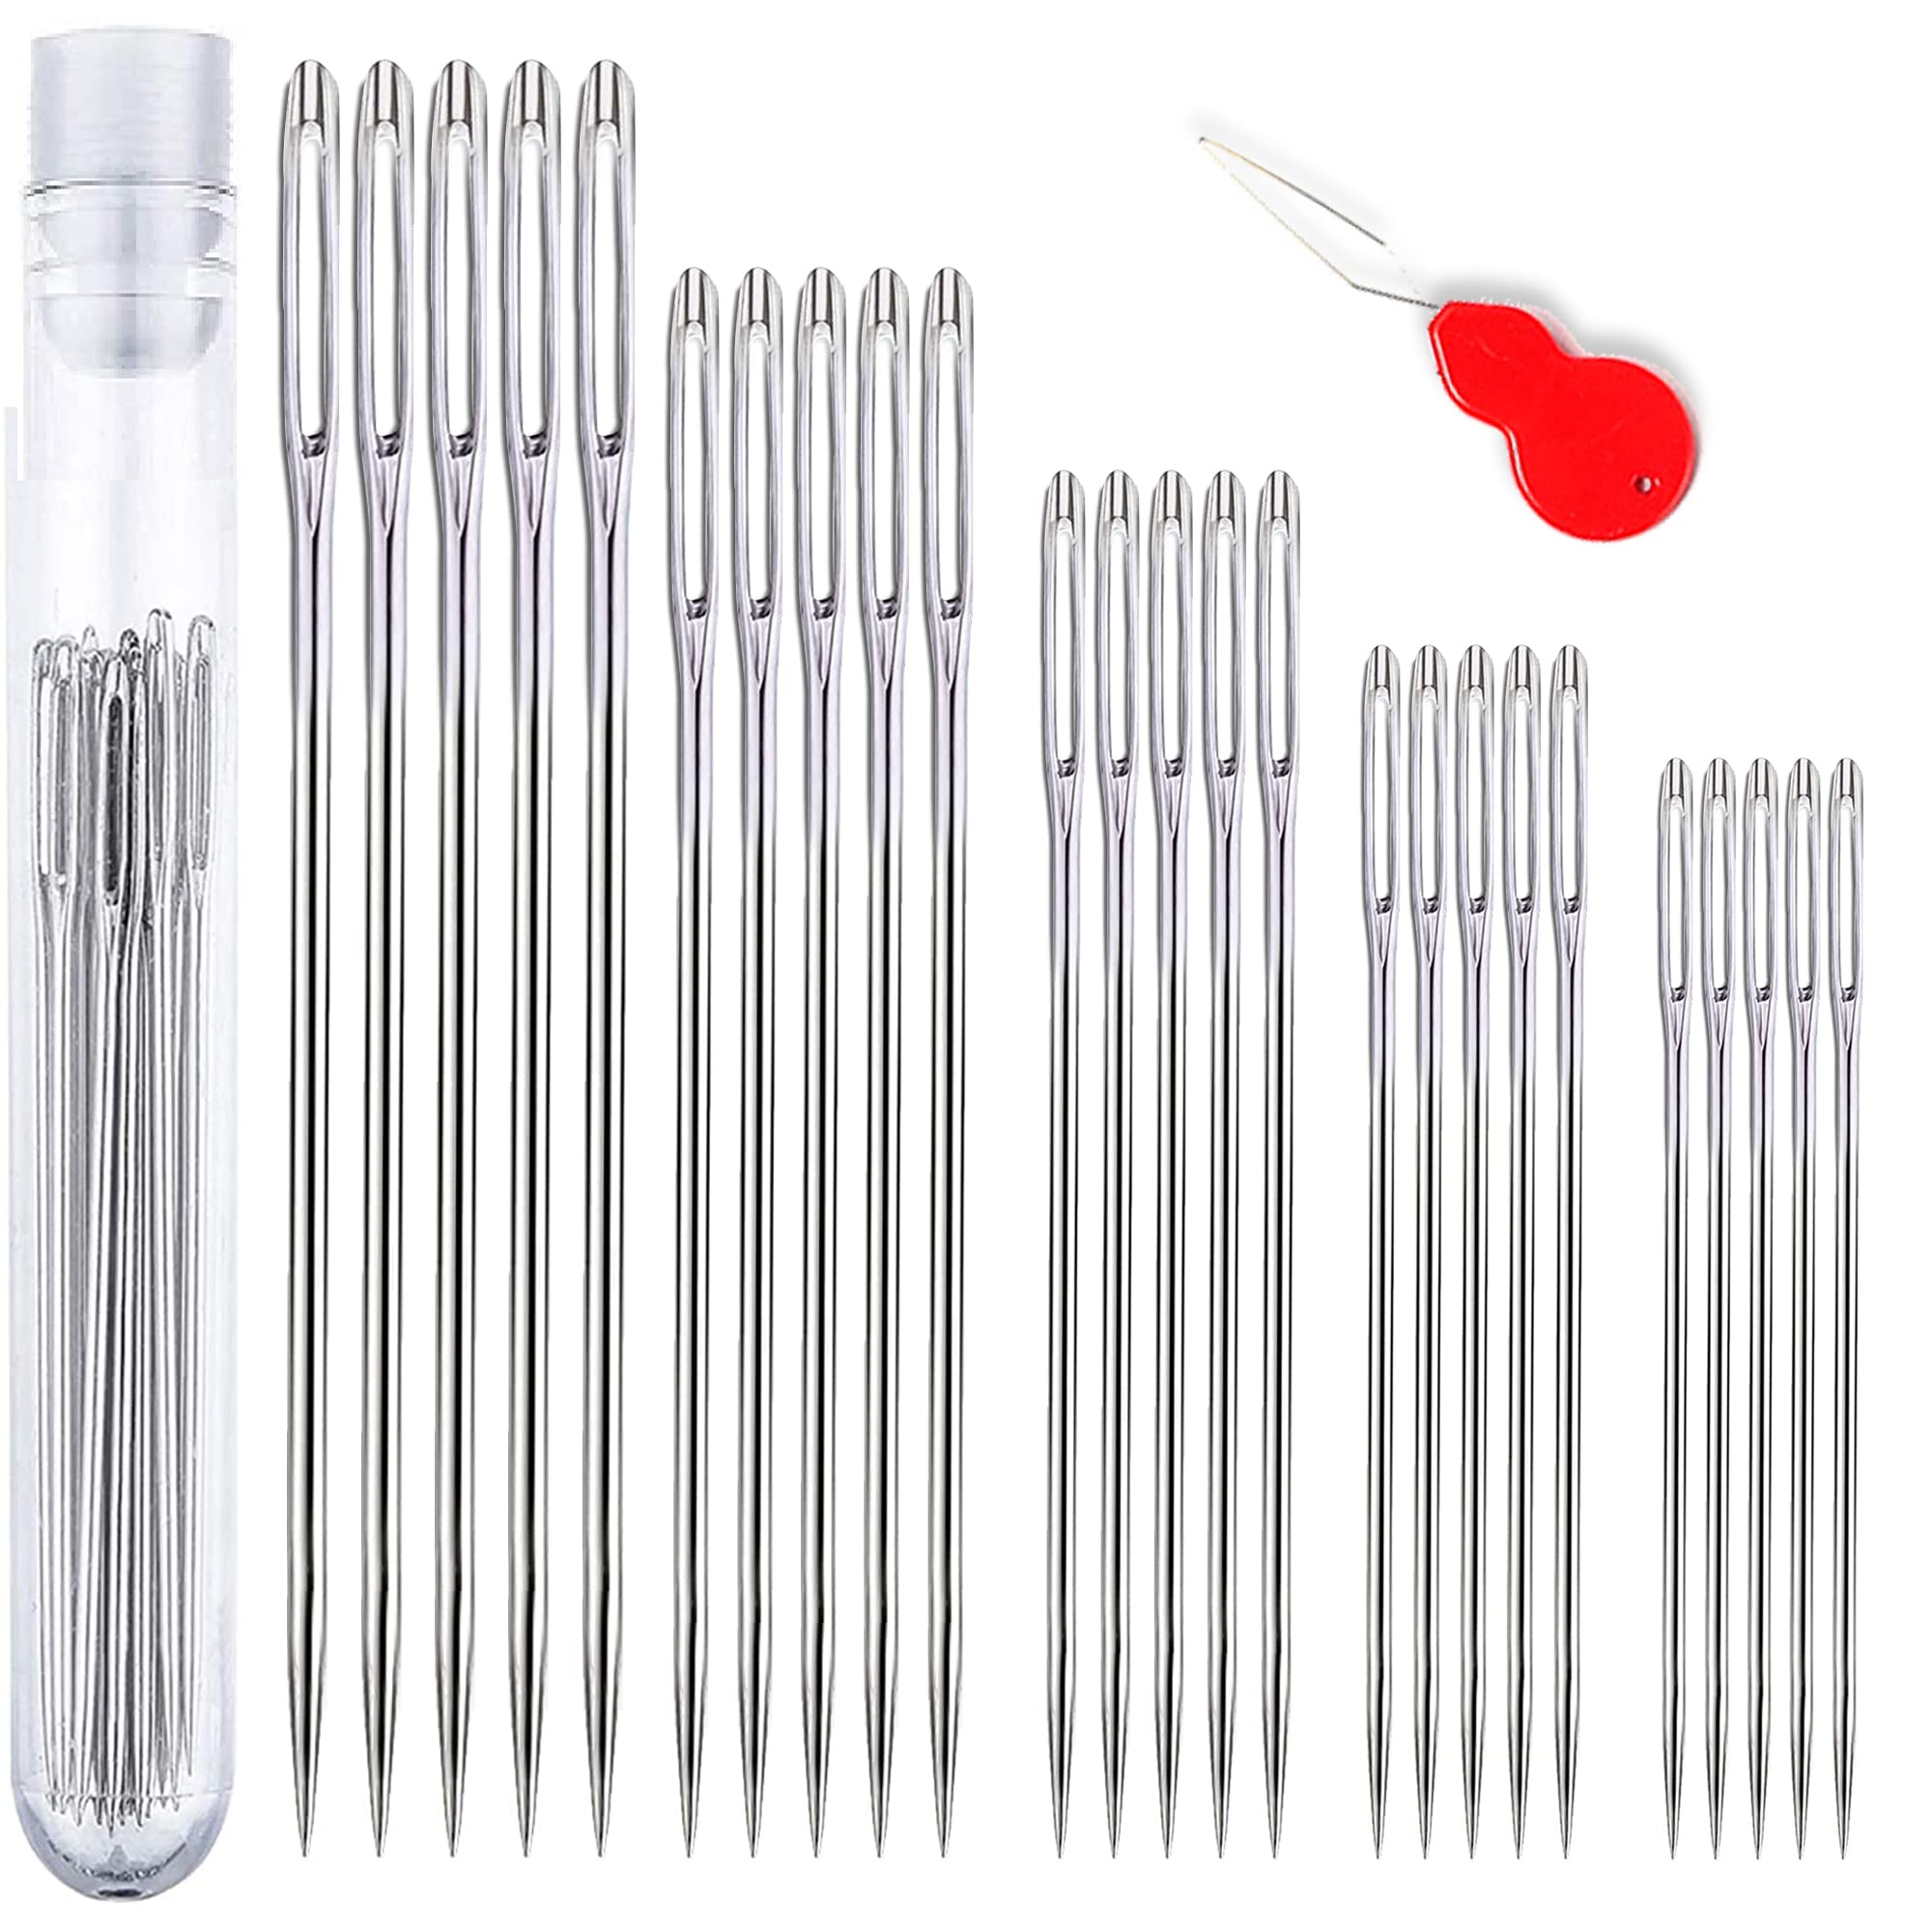 28PCS Large Eye Sharp Sewing Needles 1.5-2.5 Stainless Steel Hand Quilting  Needles Four Sizes In A Handy Storage Tube - AliExpress